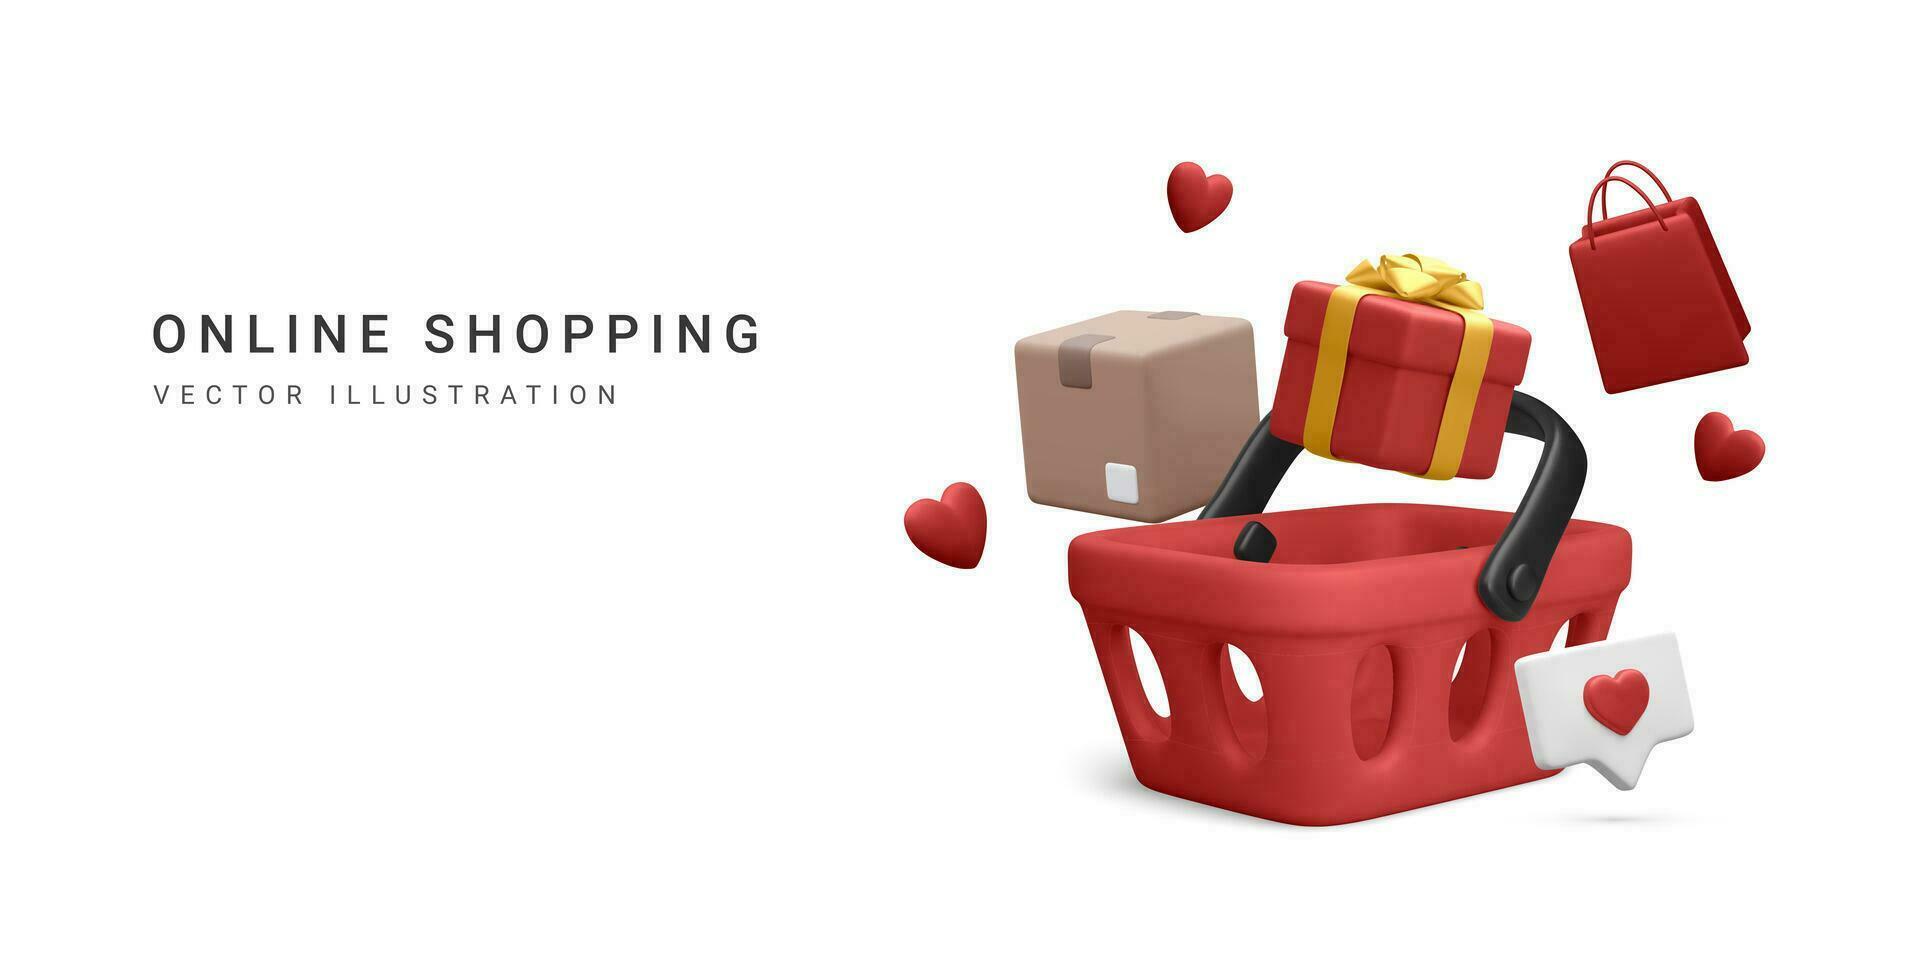 3d realistic shopping basket, shop bag, parcel and gift box in cartoon style on white background. Banner or web page for online shopping. Vector illustration